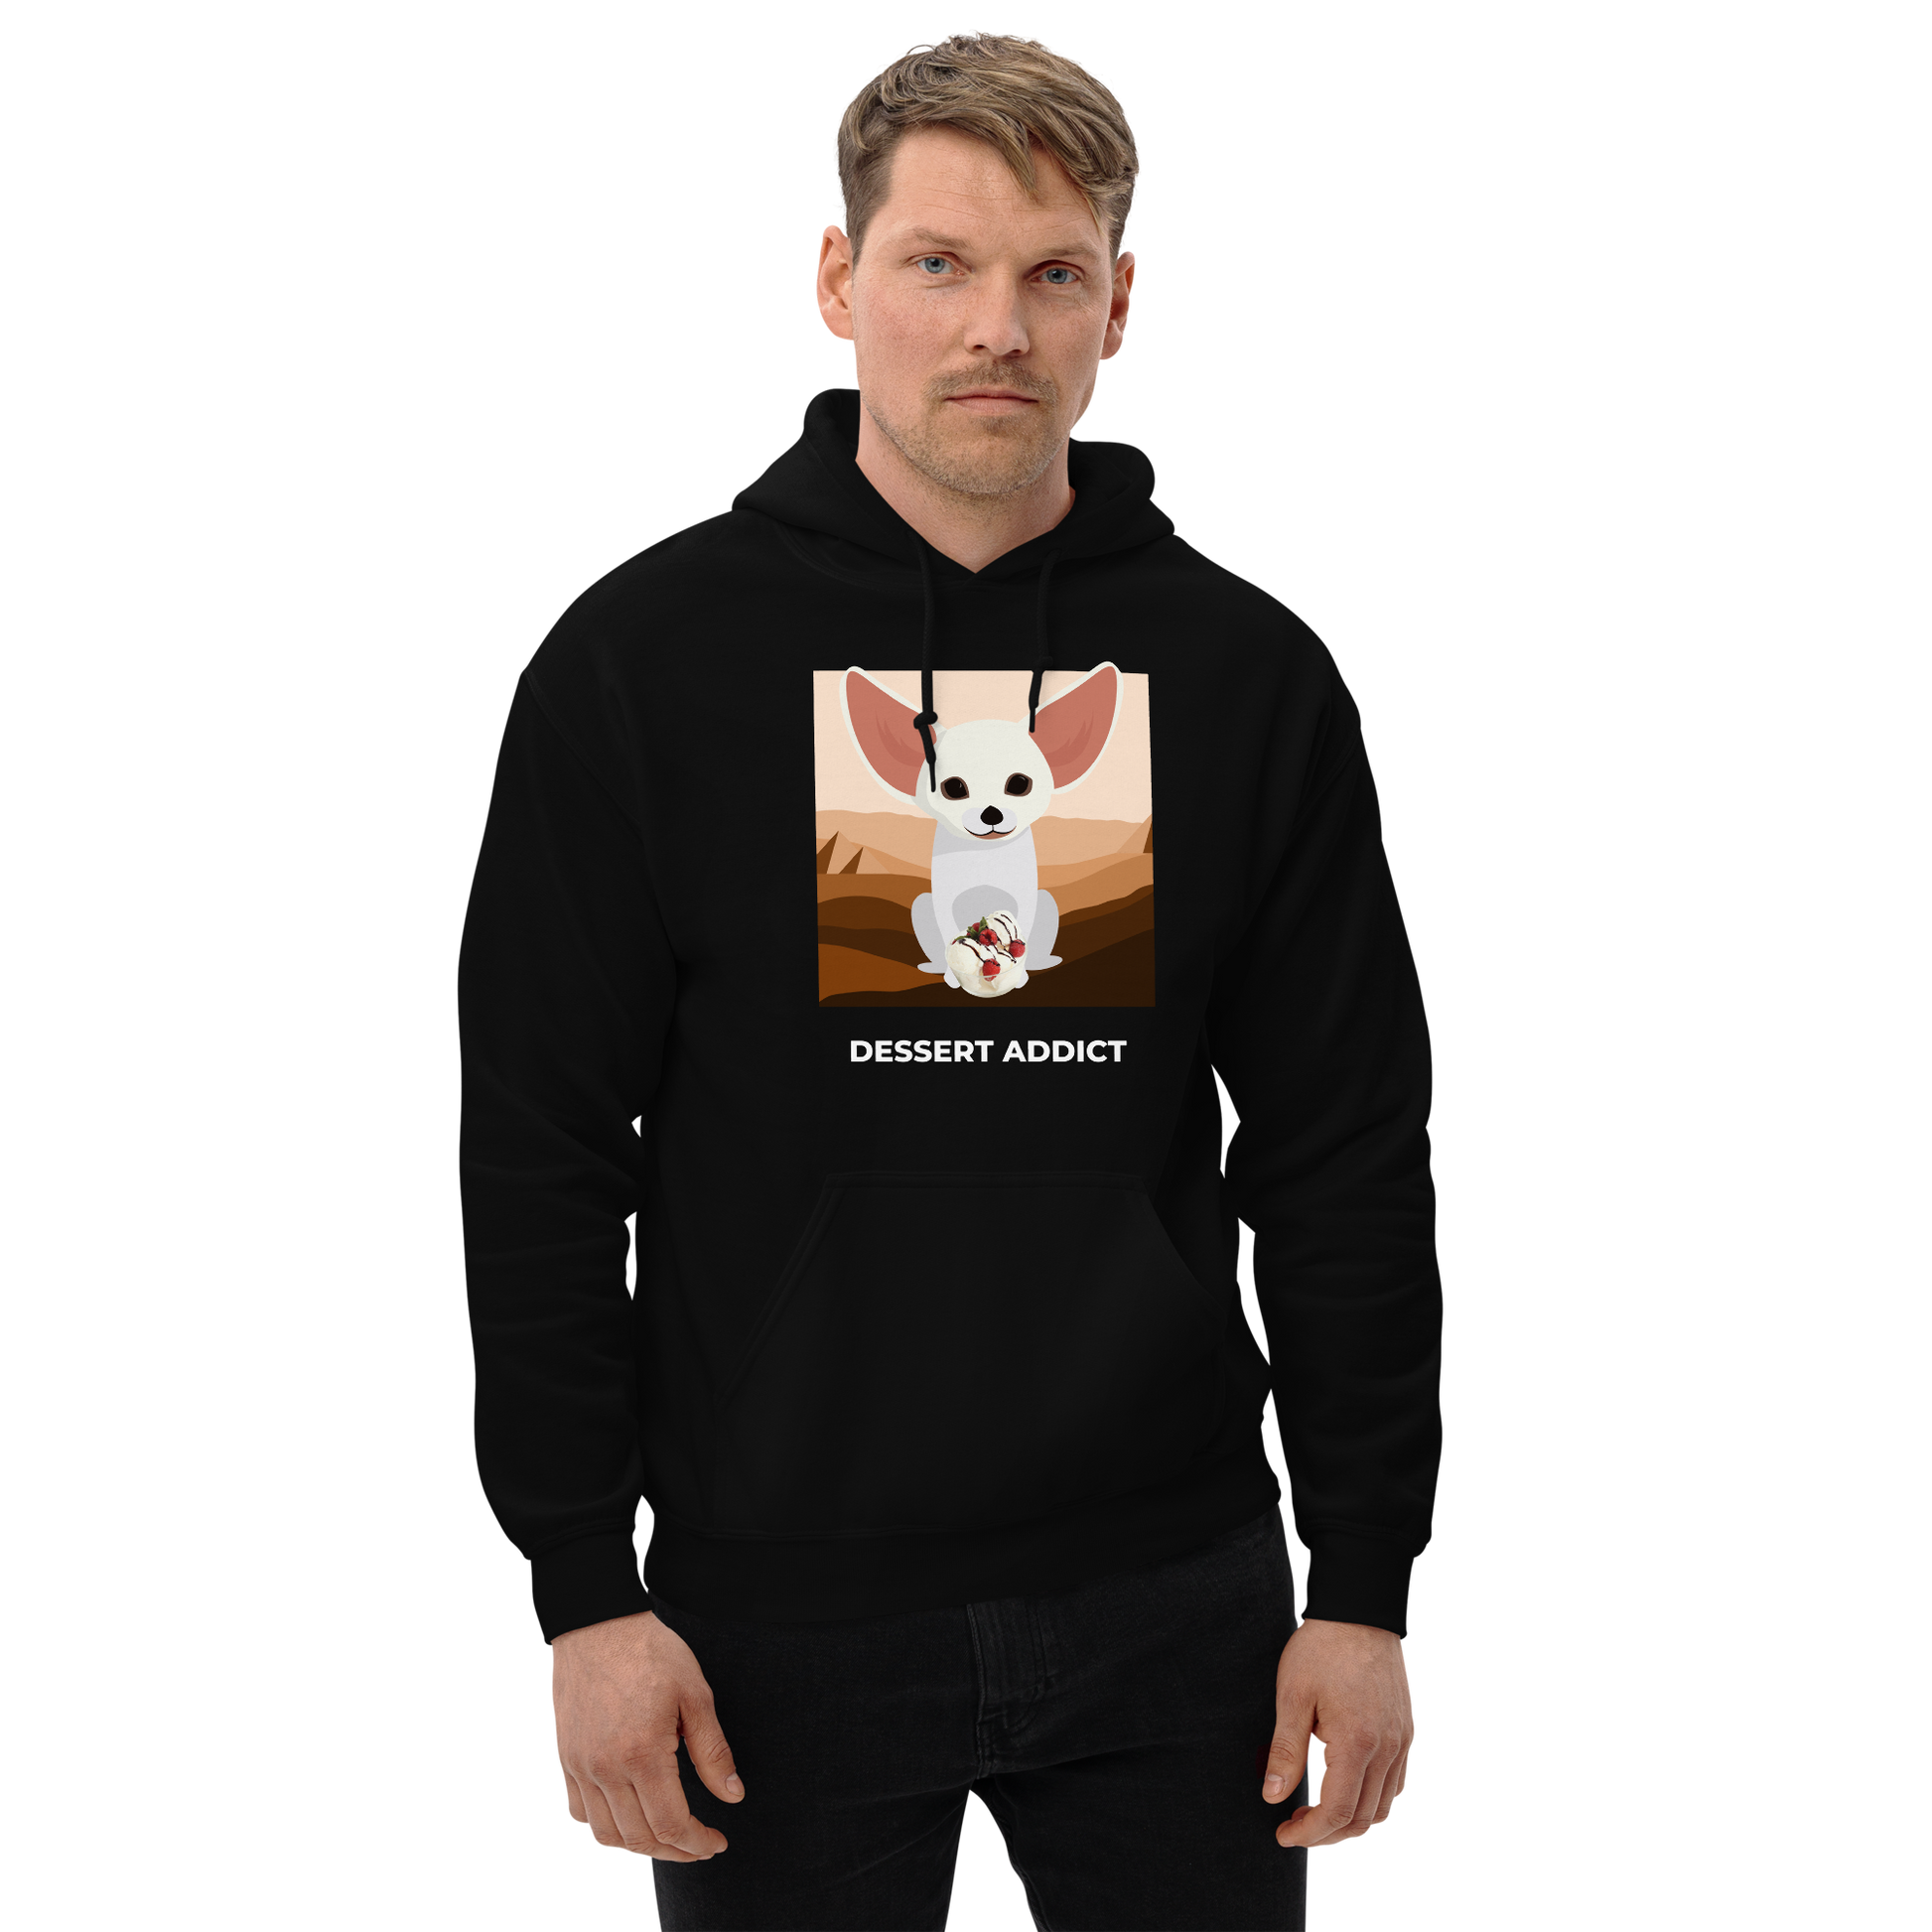 Man Wearing a Black Fennec Fox Hoodie featuring an adorable Dessert Addict graphic on the chest - Funny Graphic Fennec Fox Hoodies - Boozy Fox